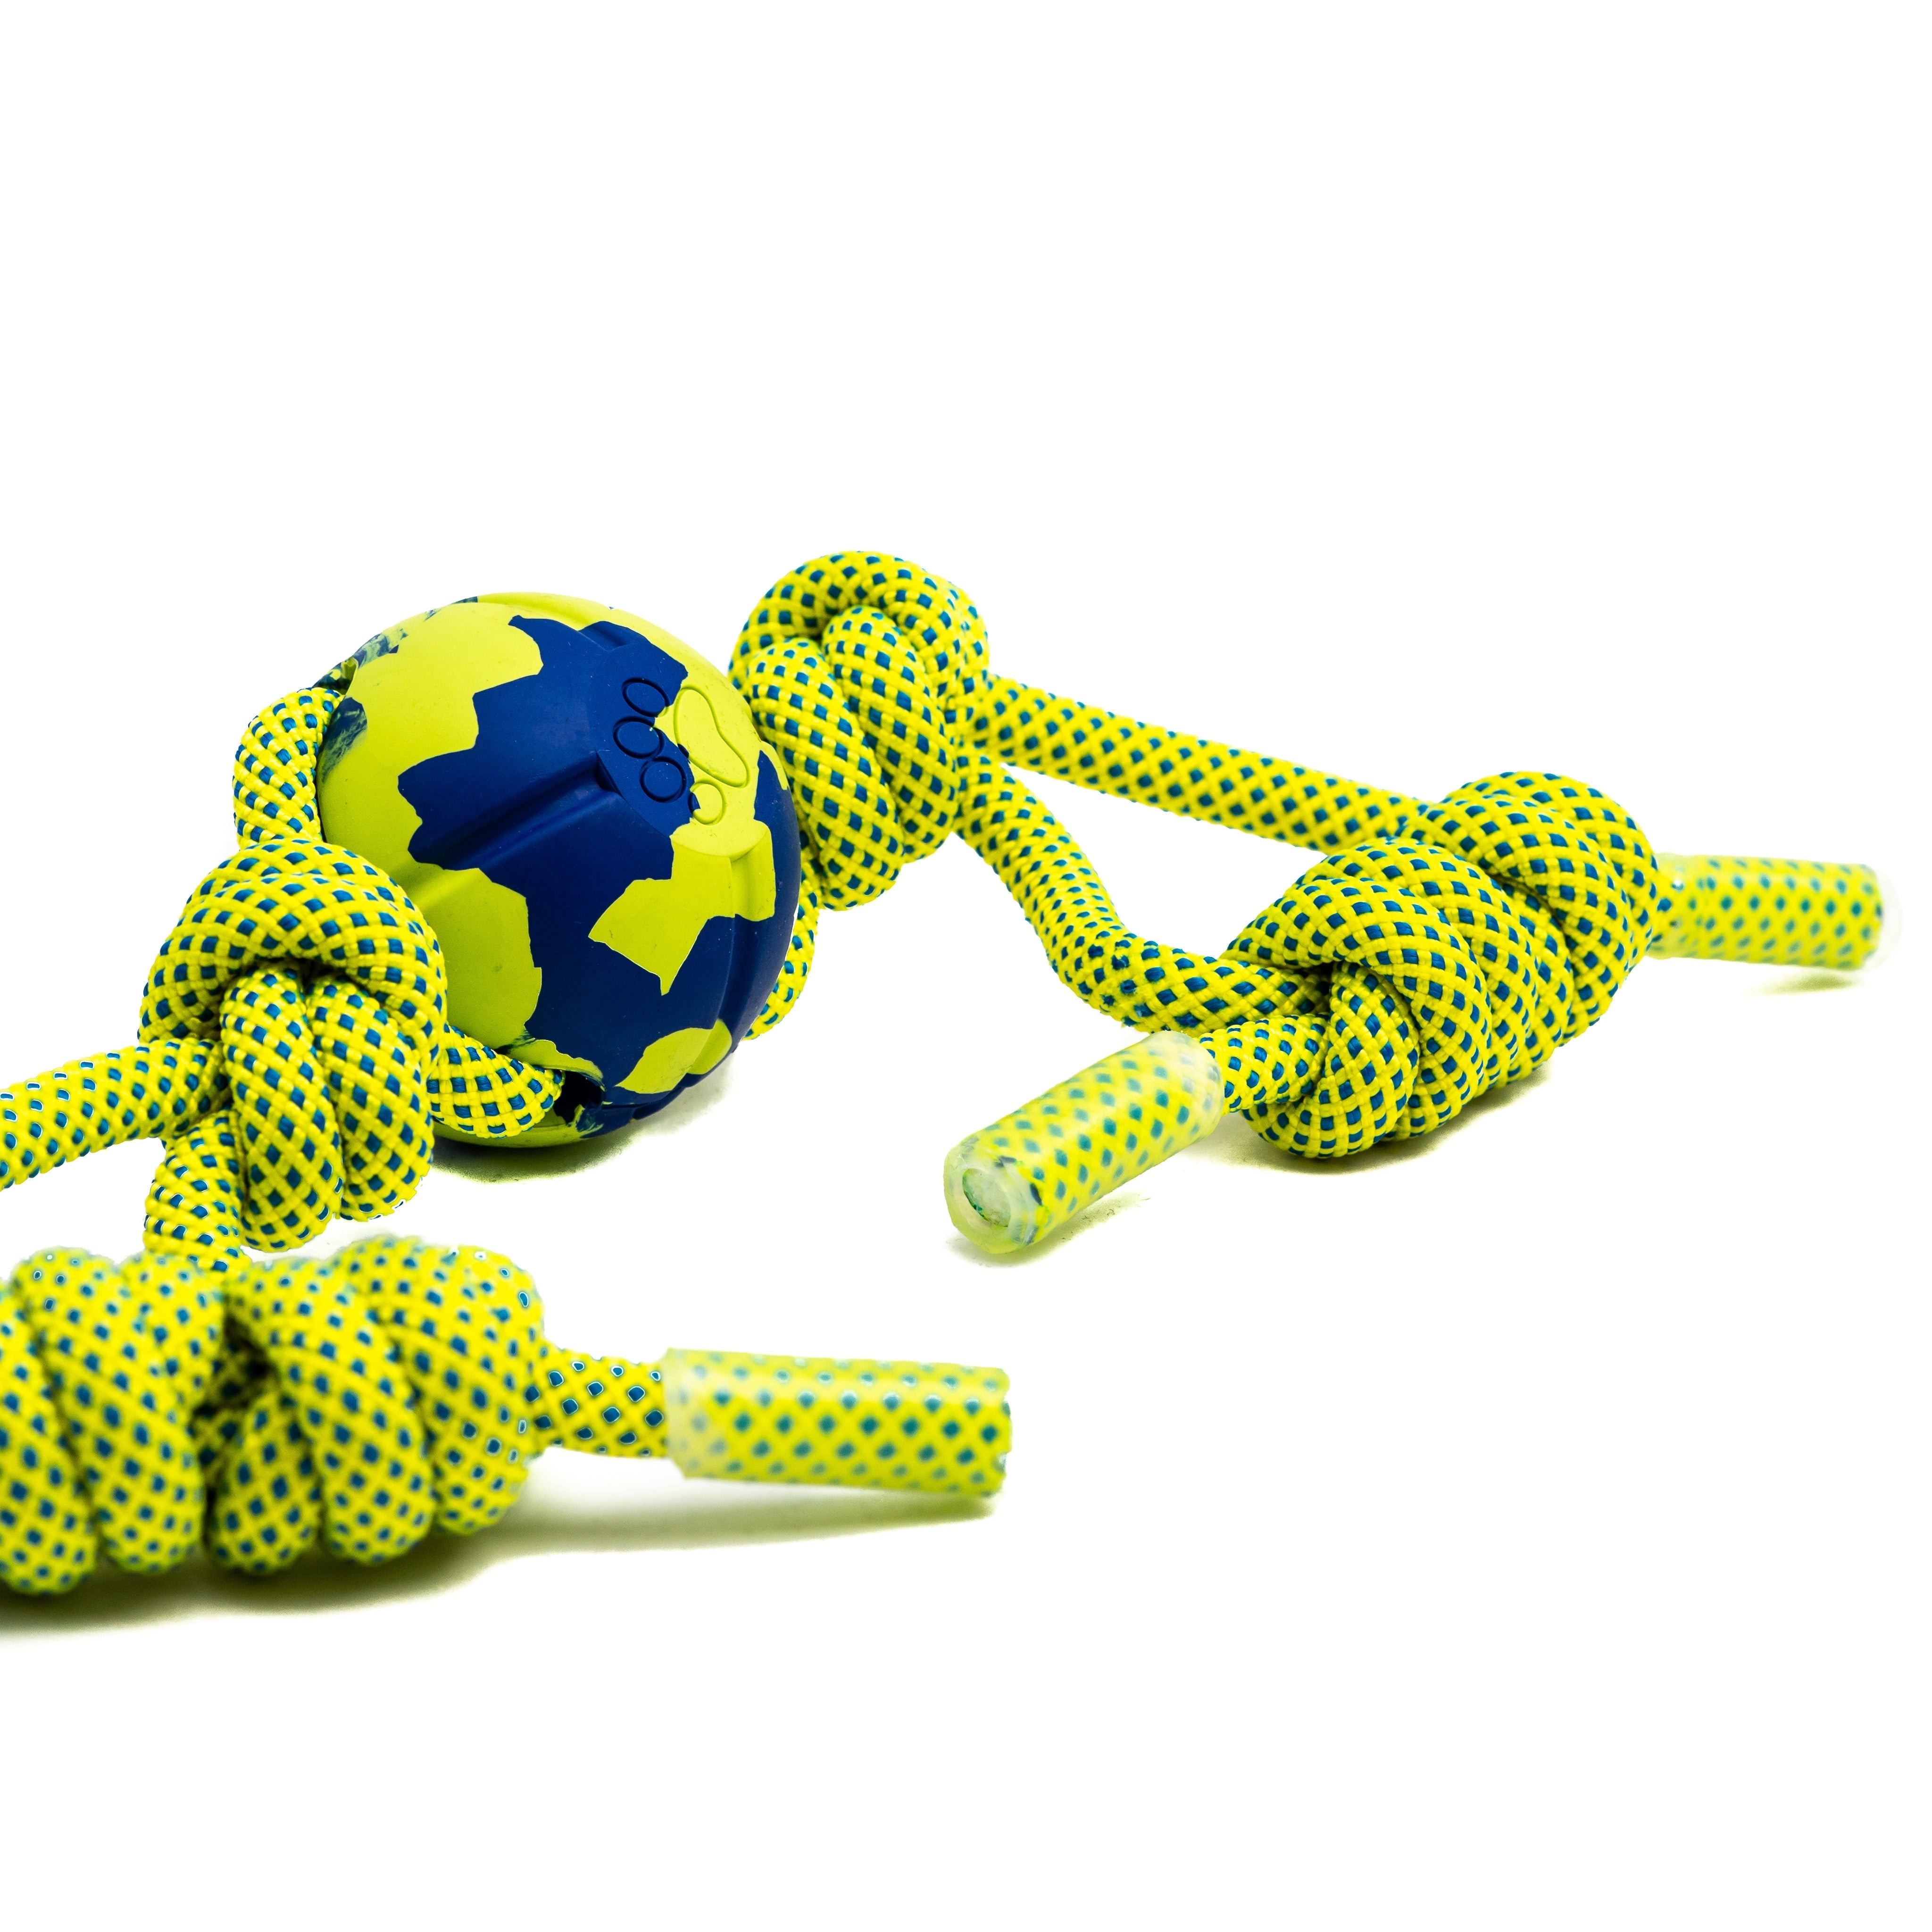 We are always up for finding new ways to train! You can fill the holes with peanut butter or a bully stick, which makes it a great natural chew toy that promotes gym health. You can use Circle 8 dog toy for rowing with your dog by grabbing the rope on both ends and pulling in a rowing motion as the puppy holds on to the ball.